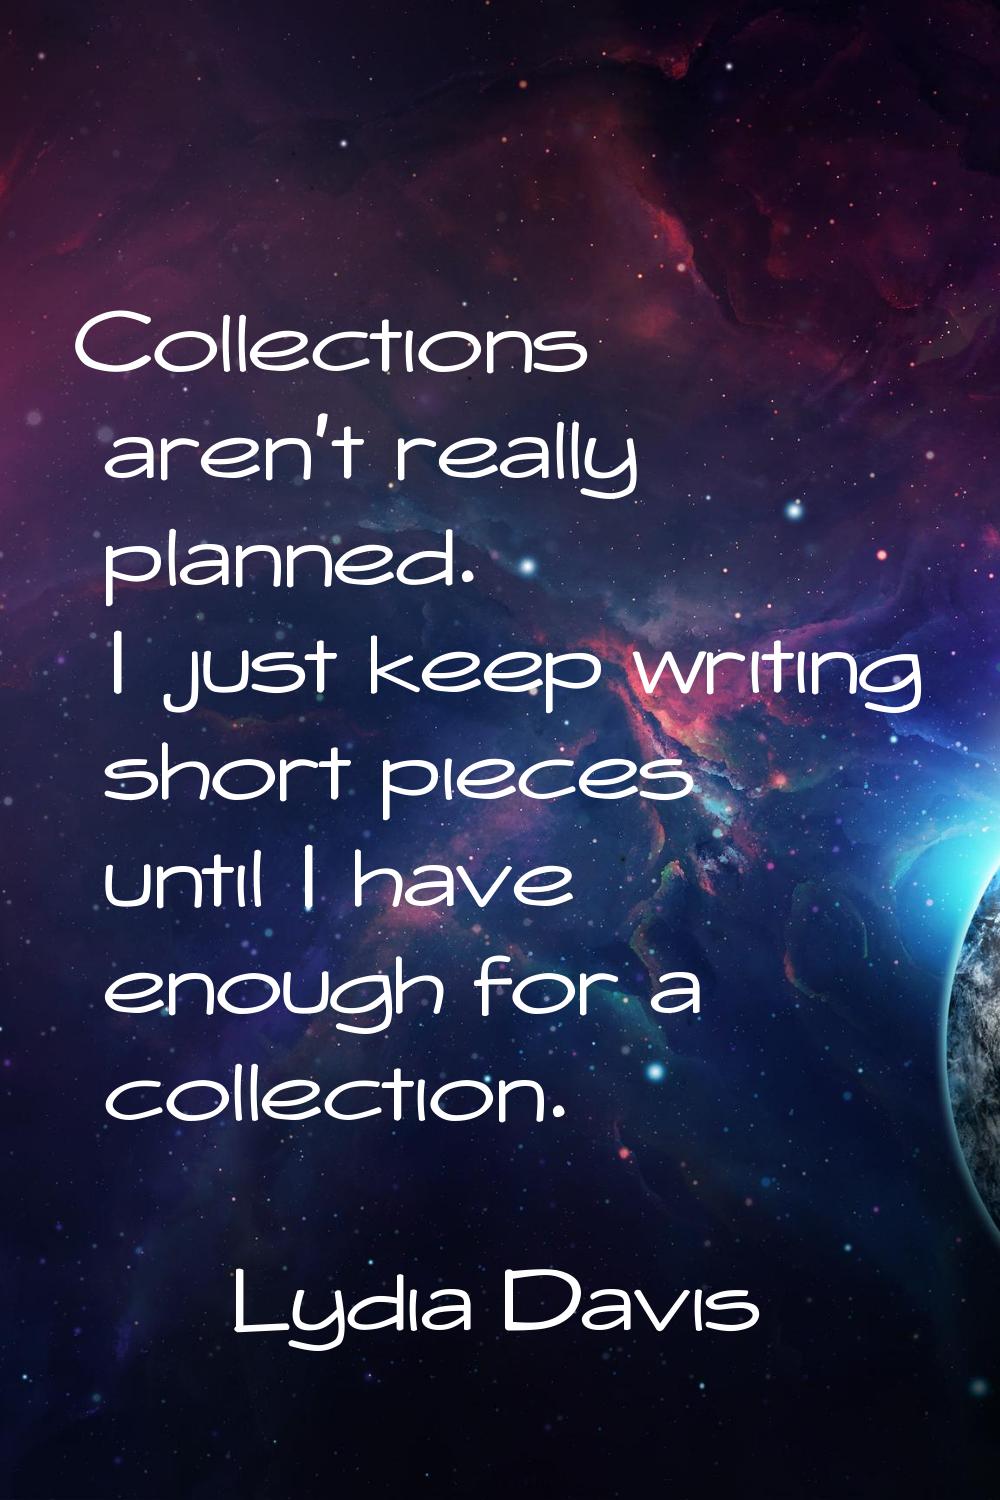 Collections aren't really planned. I just keep writing short pieces until I have enough for a colle